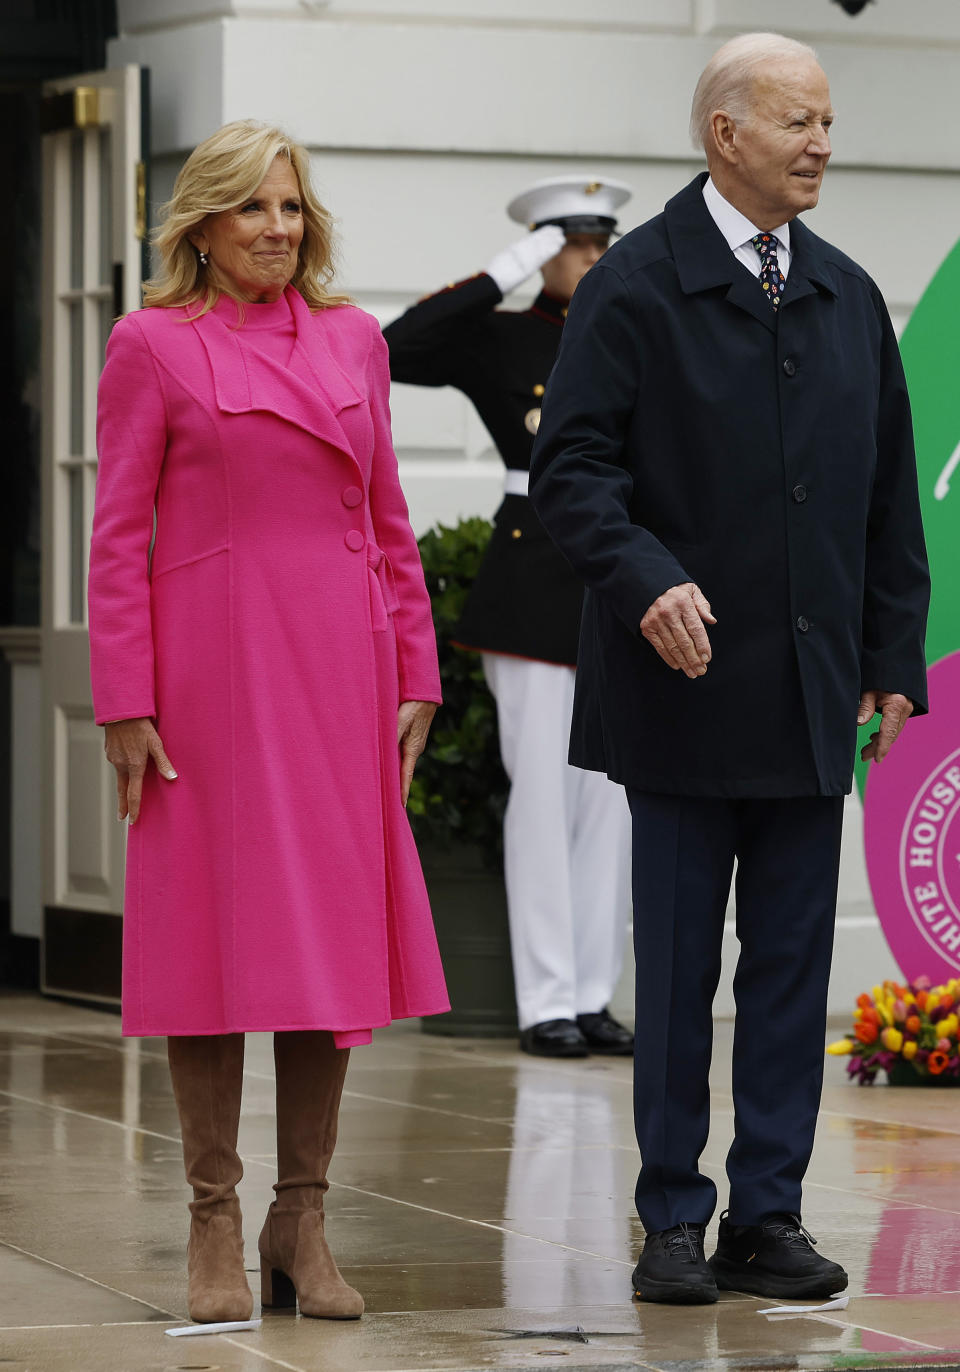 WASHINGTON, DC - APRIL 01: (L-R) pink coat dress First lady Jill Biden, U.S. President Joe Biden, Vice President Kamala Harris and second gentleman Doug Emhoff wave to guests during the White House Easter Egg Roll on the South Lawn on April 01, 2024 in Washington, DC. The White House said they are expecting thousands of children and adults to participate in the annual tradition of rolling colored eggs down the White House lawn, a tradition started by President Rutherford B. Hayes in 1878.  (Photo by Chip Somodevilla/Getty Images)